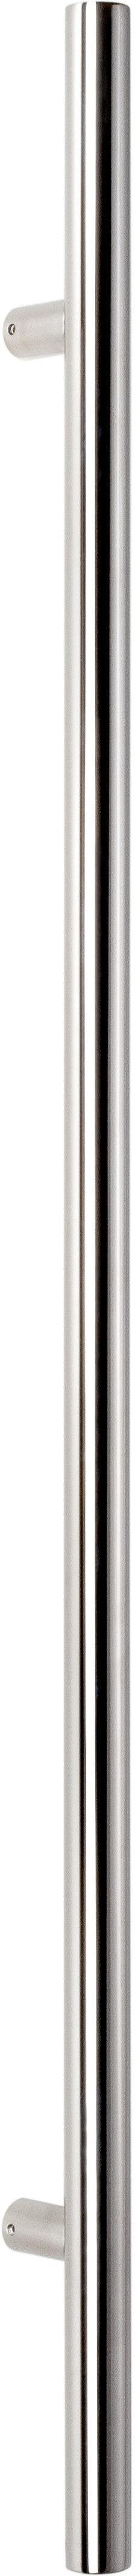 Sure-Loc 72" Round Long Door Pull, Single-Sided in Polished Chrome finish